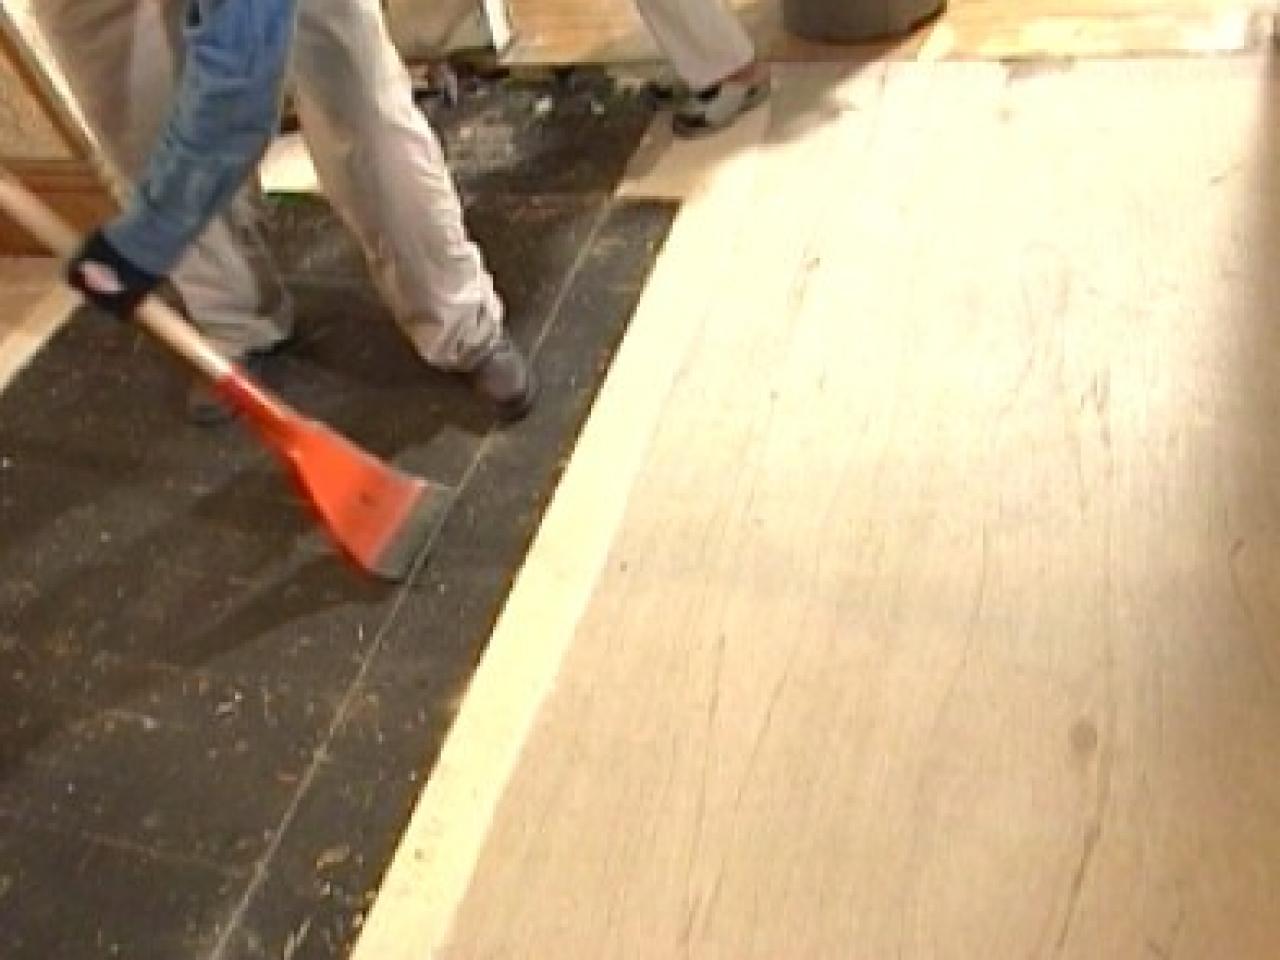 How to Replace Underlayment in a Kitchen | how-tos | DIY